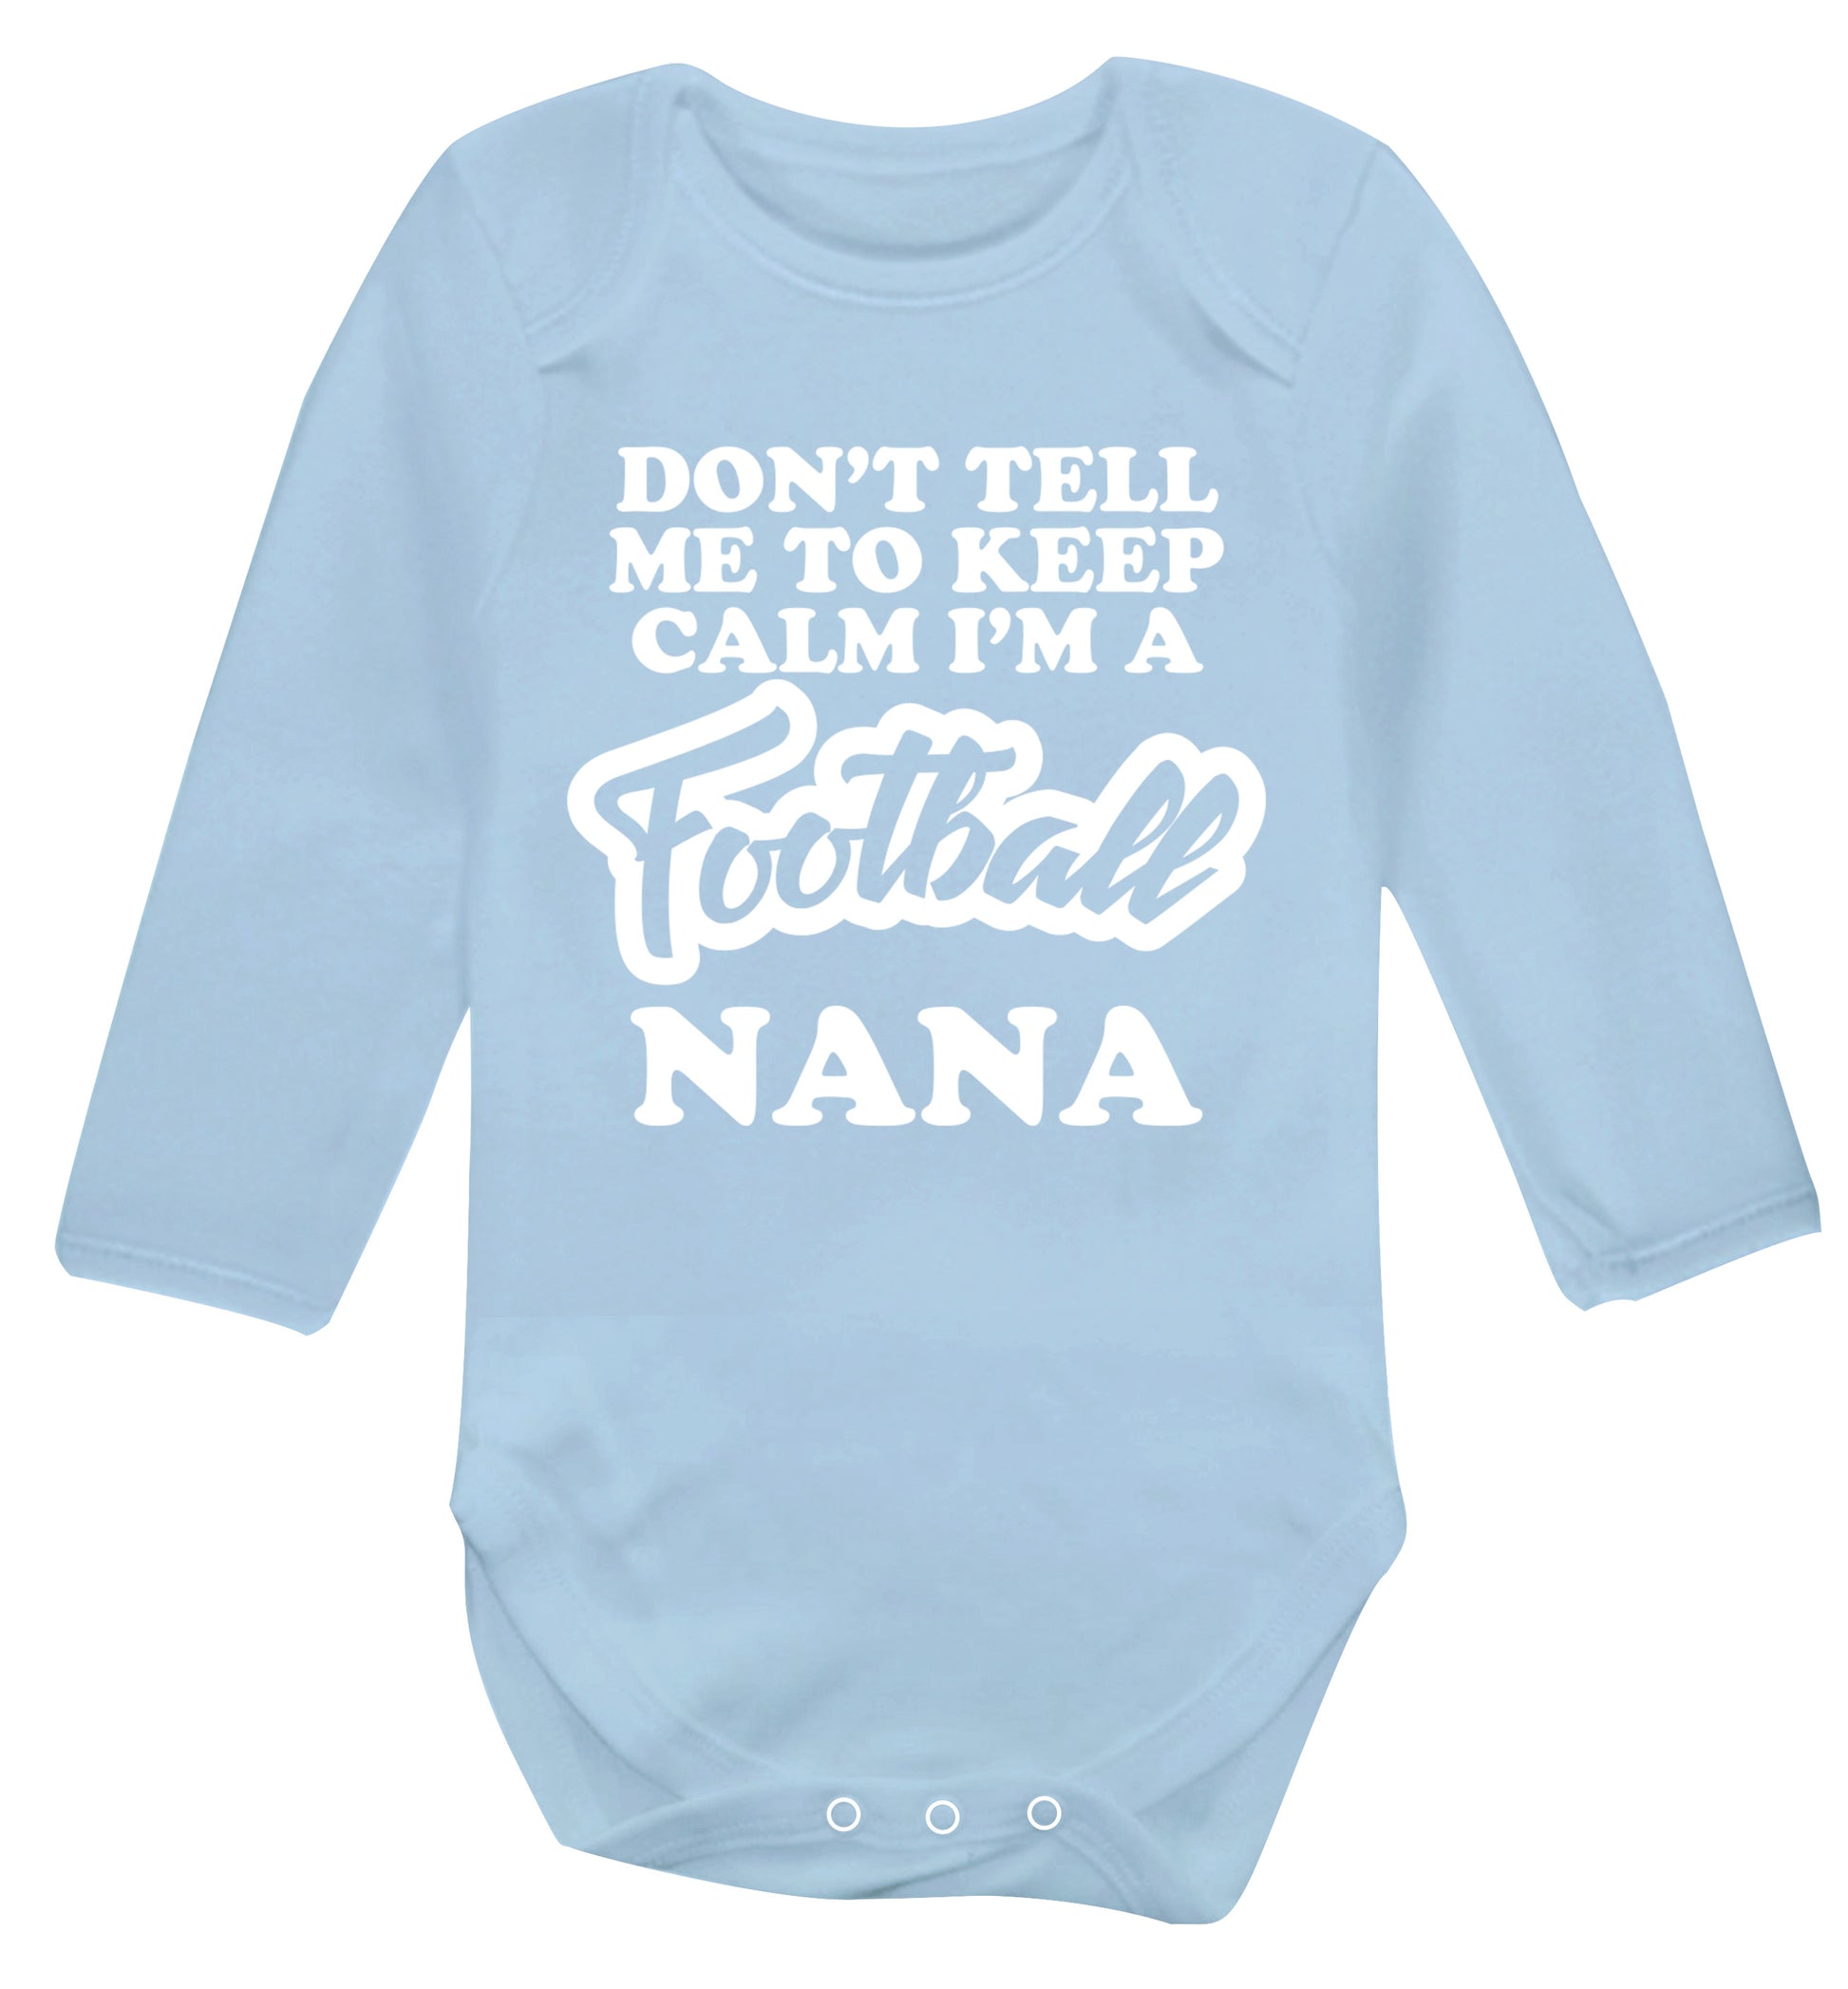 Don't tell me to keep calm I'm a football nana Baby Vest long sleeved pale blue 6-12 months